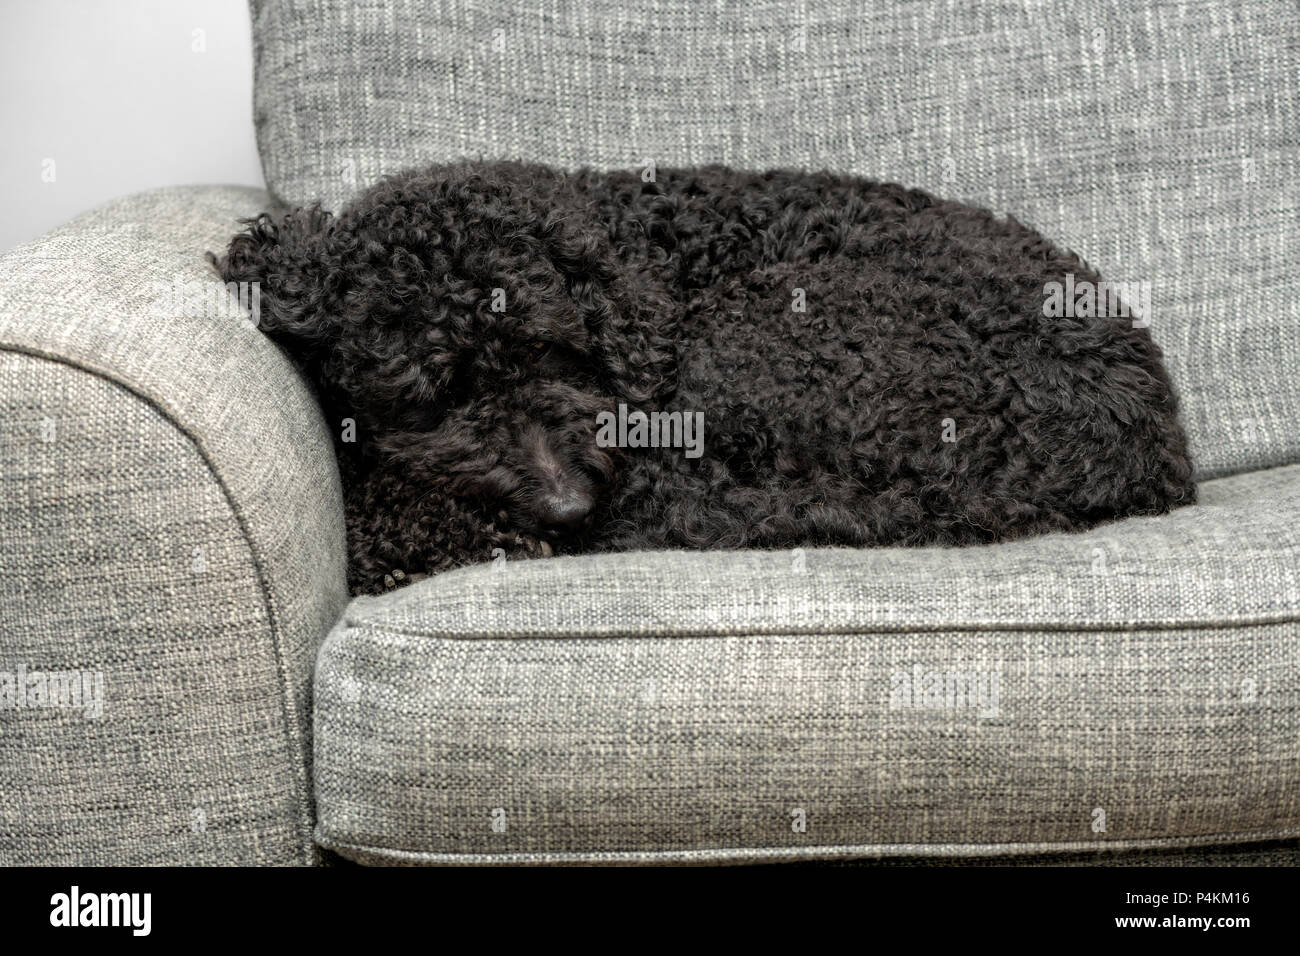 Cute black Labradoodle curled up asleep on a grey armchair Stock Photo